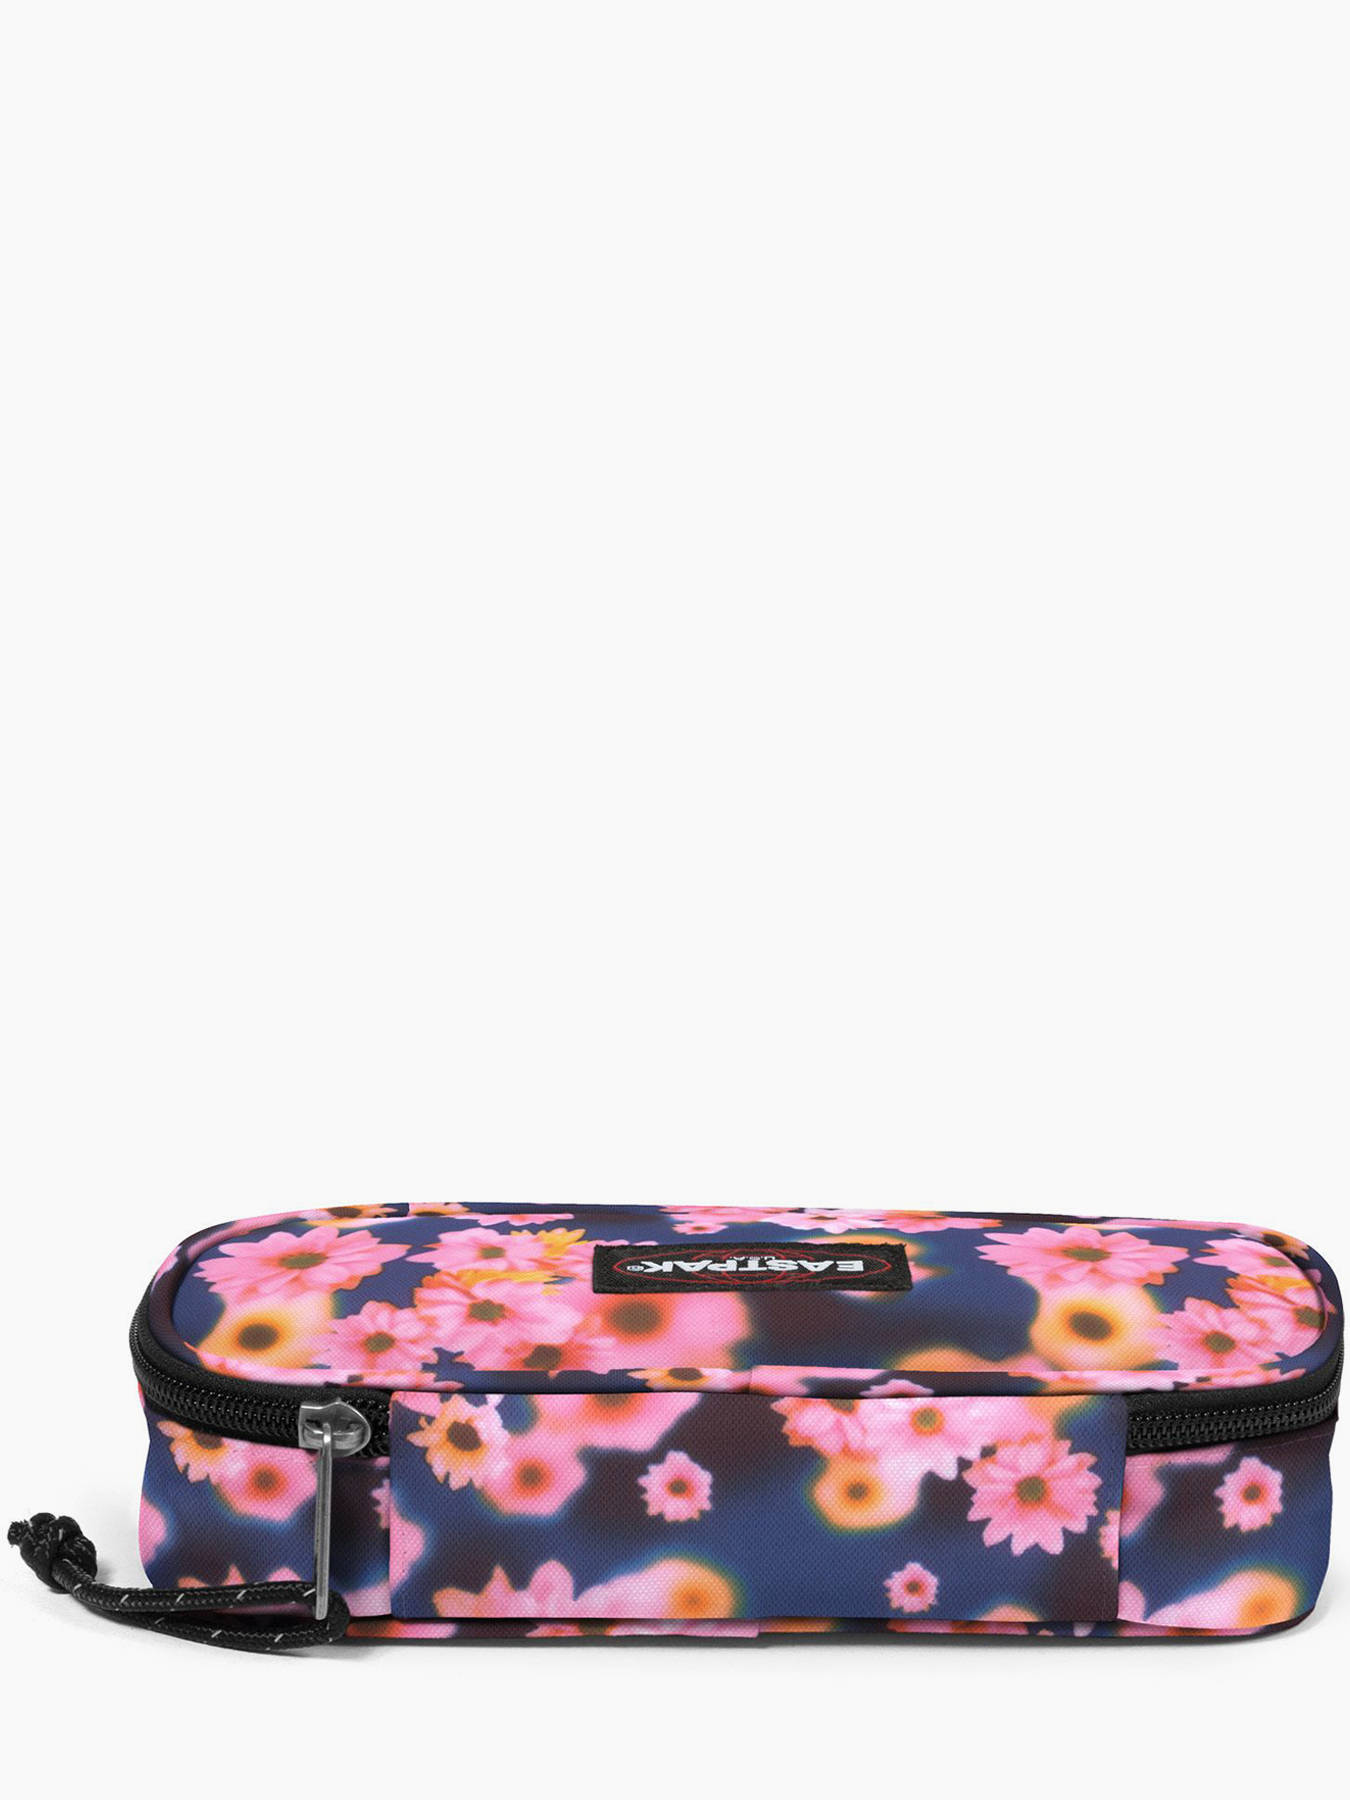 EASTPAK - TROUSSE FILLE BENCHMARK HERBS PINK- SIMPLE